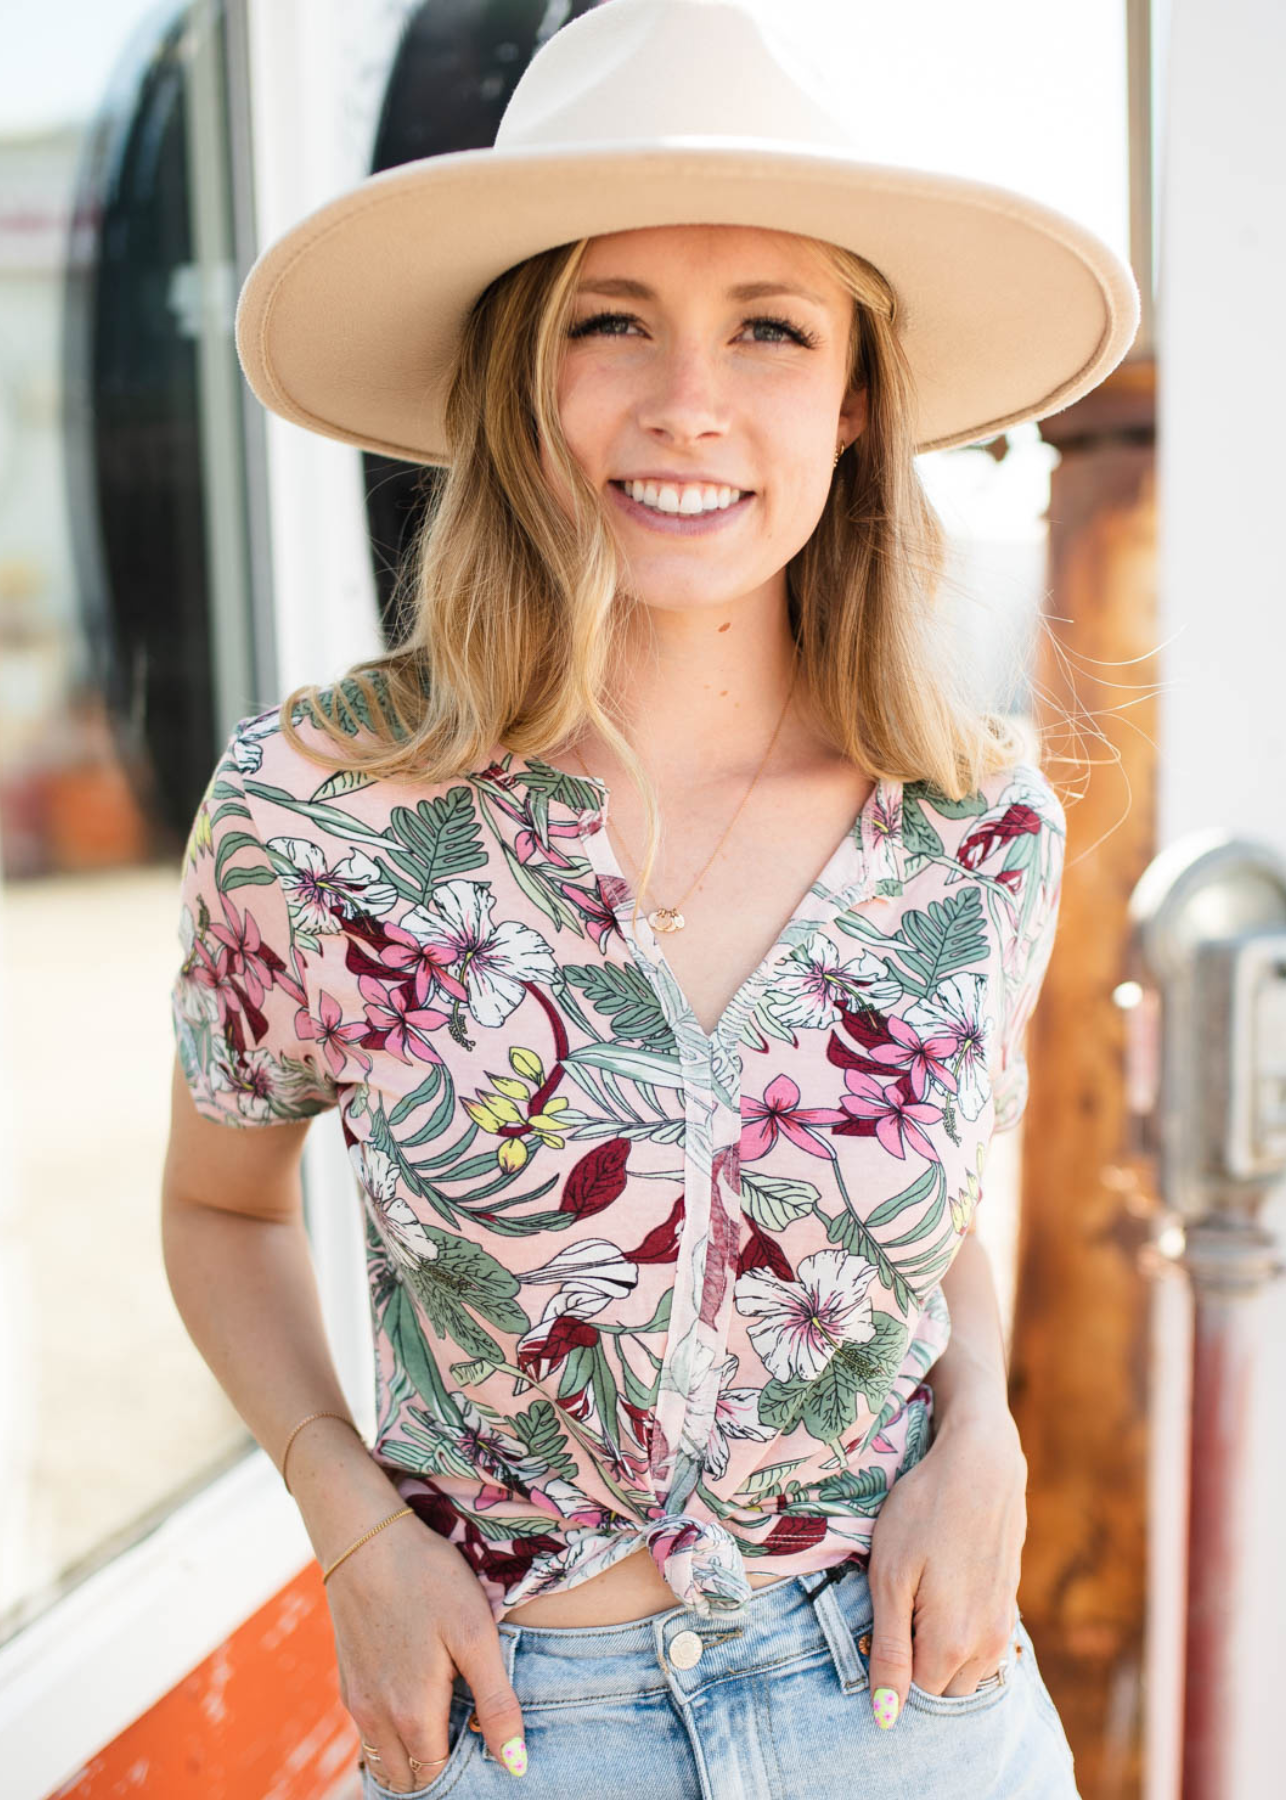 Short sleeve pink floral top that buttons up and has a v-neck.